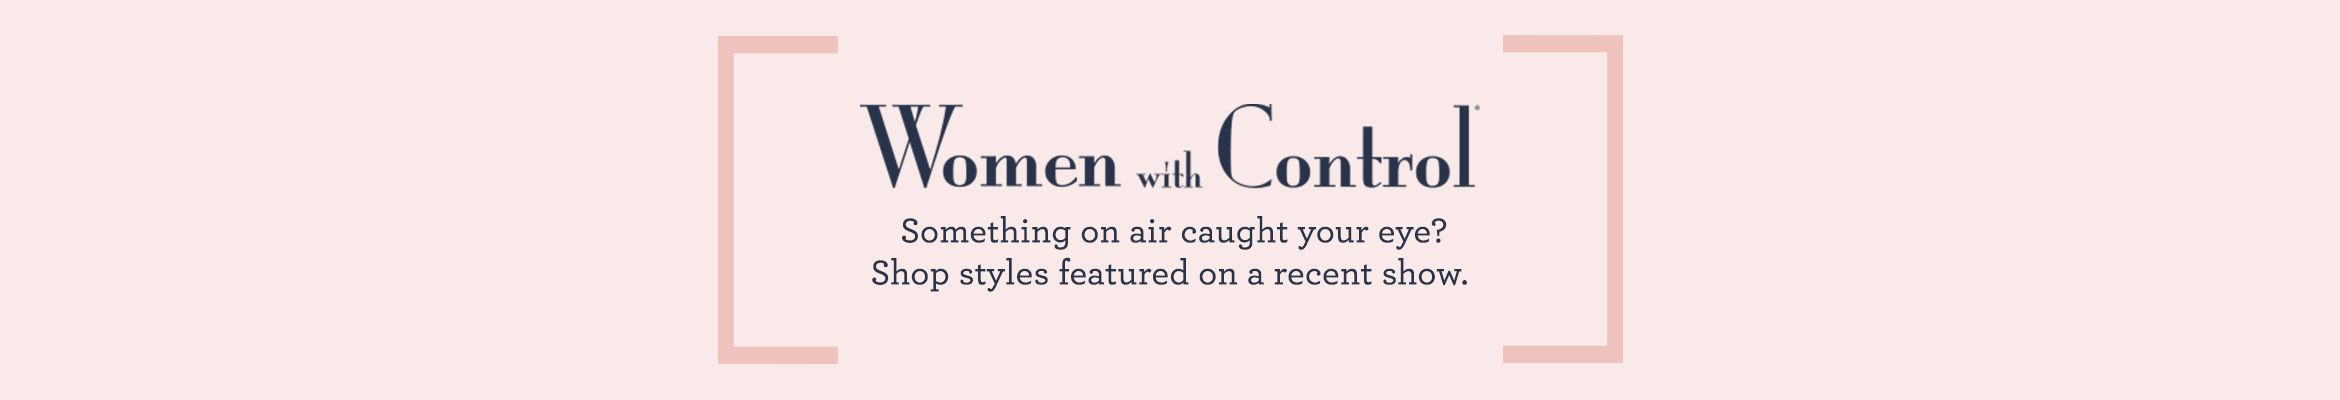 Women with Control Something on air caught your eye? Shop styles featured on a recent show. 